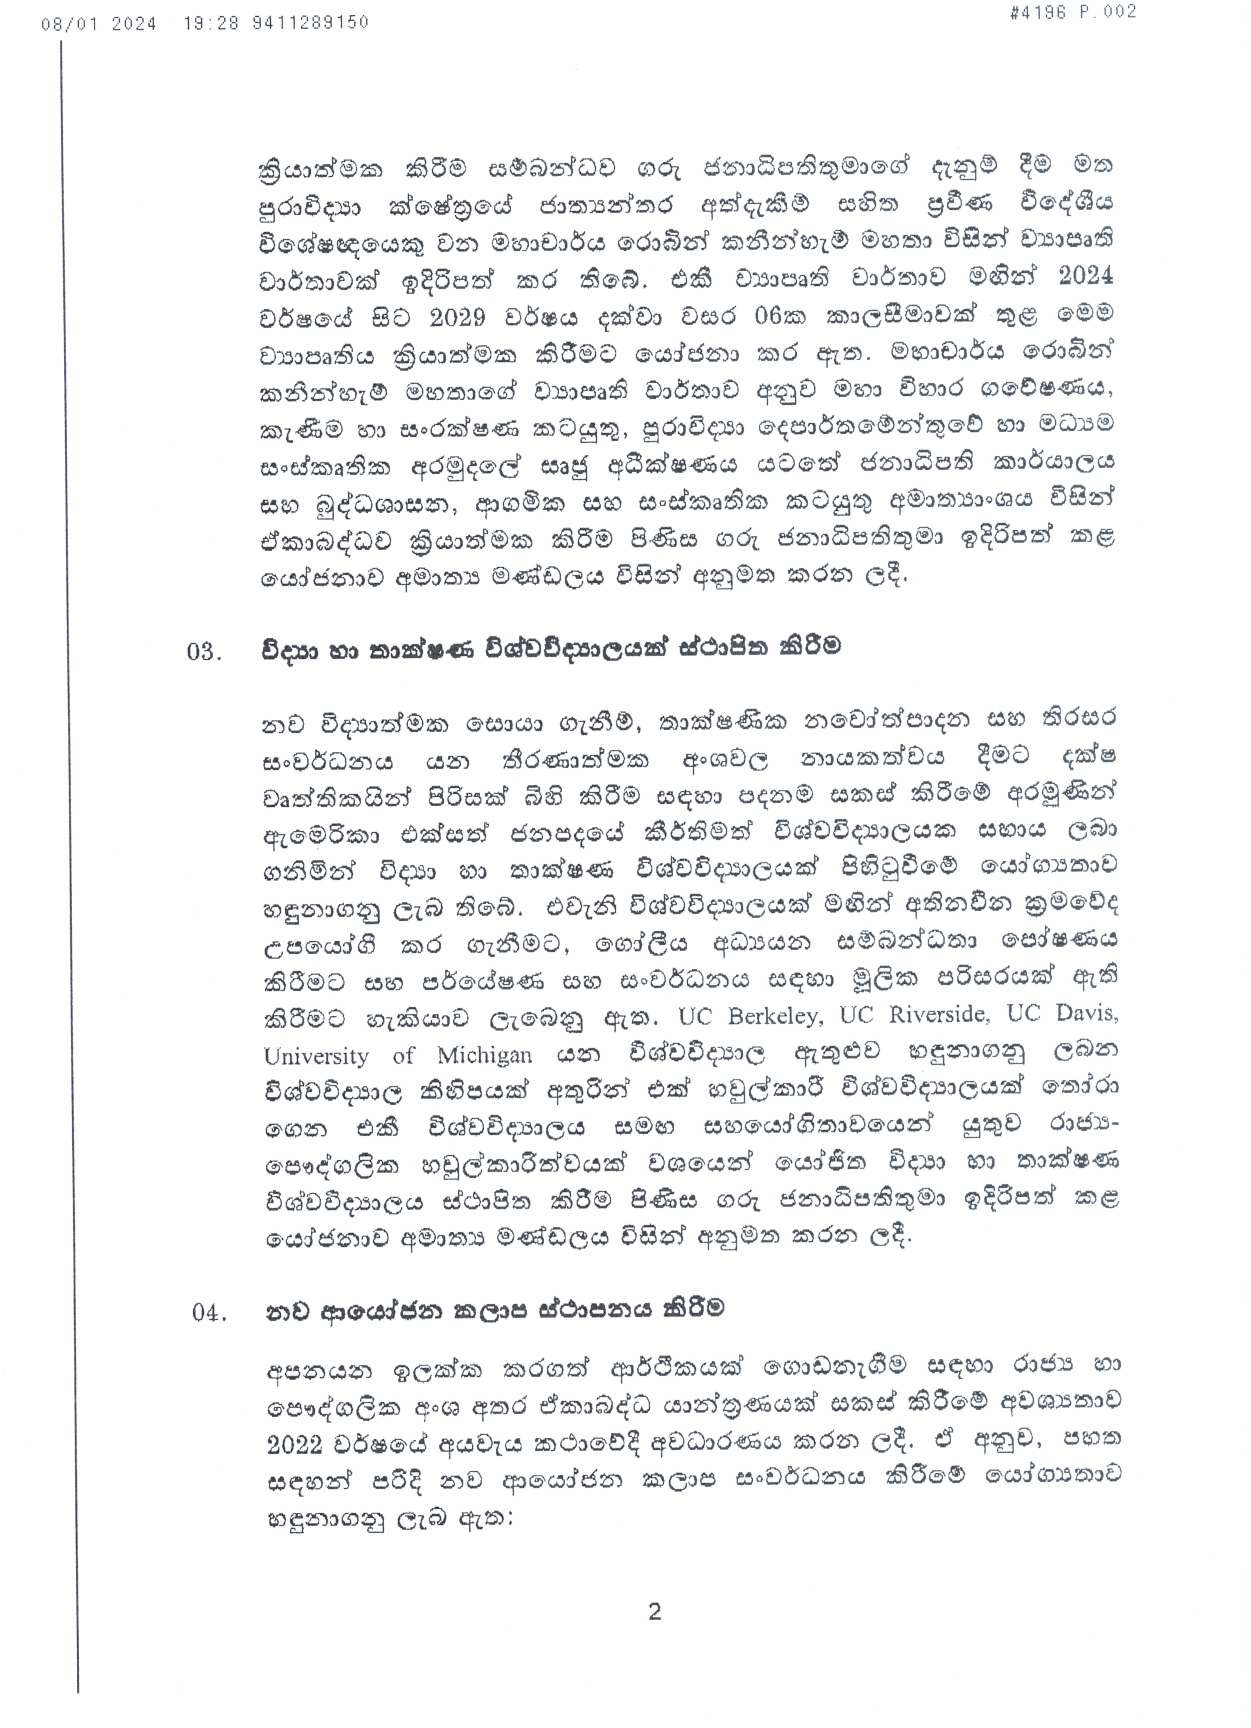 Cabinet Decision on 08.01.2024 1 page 0002